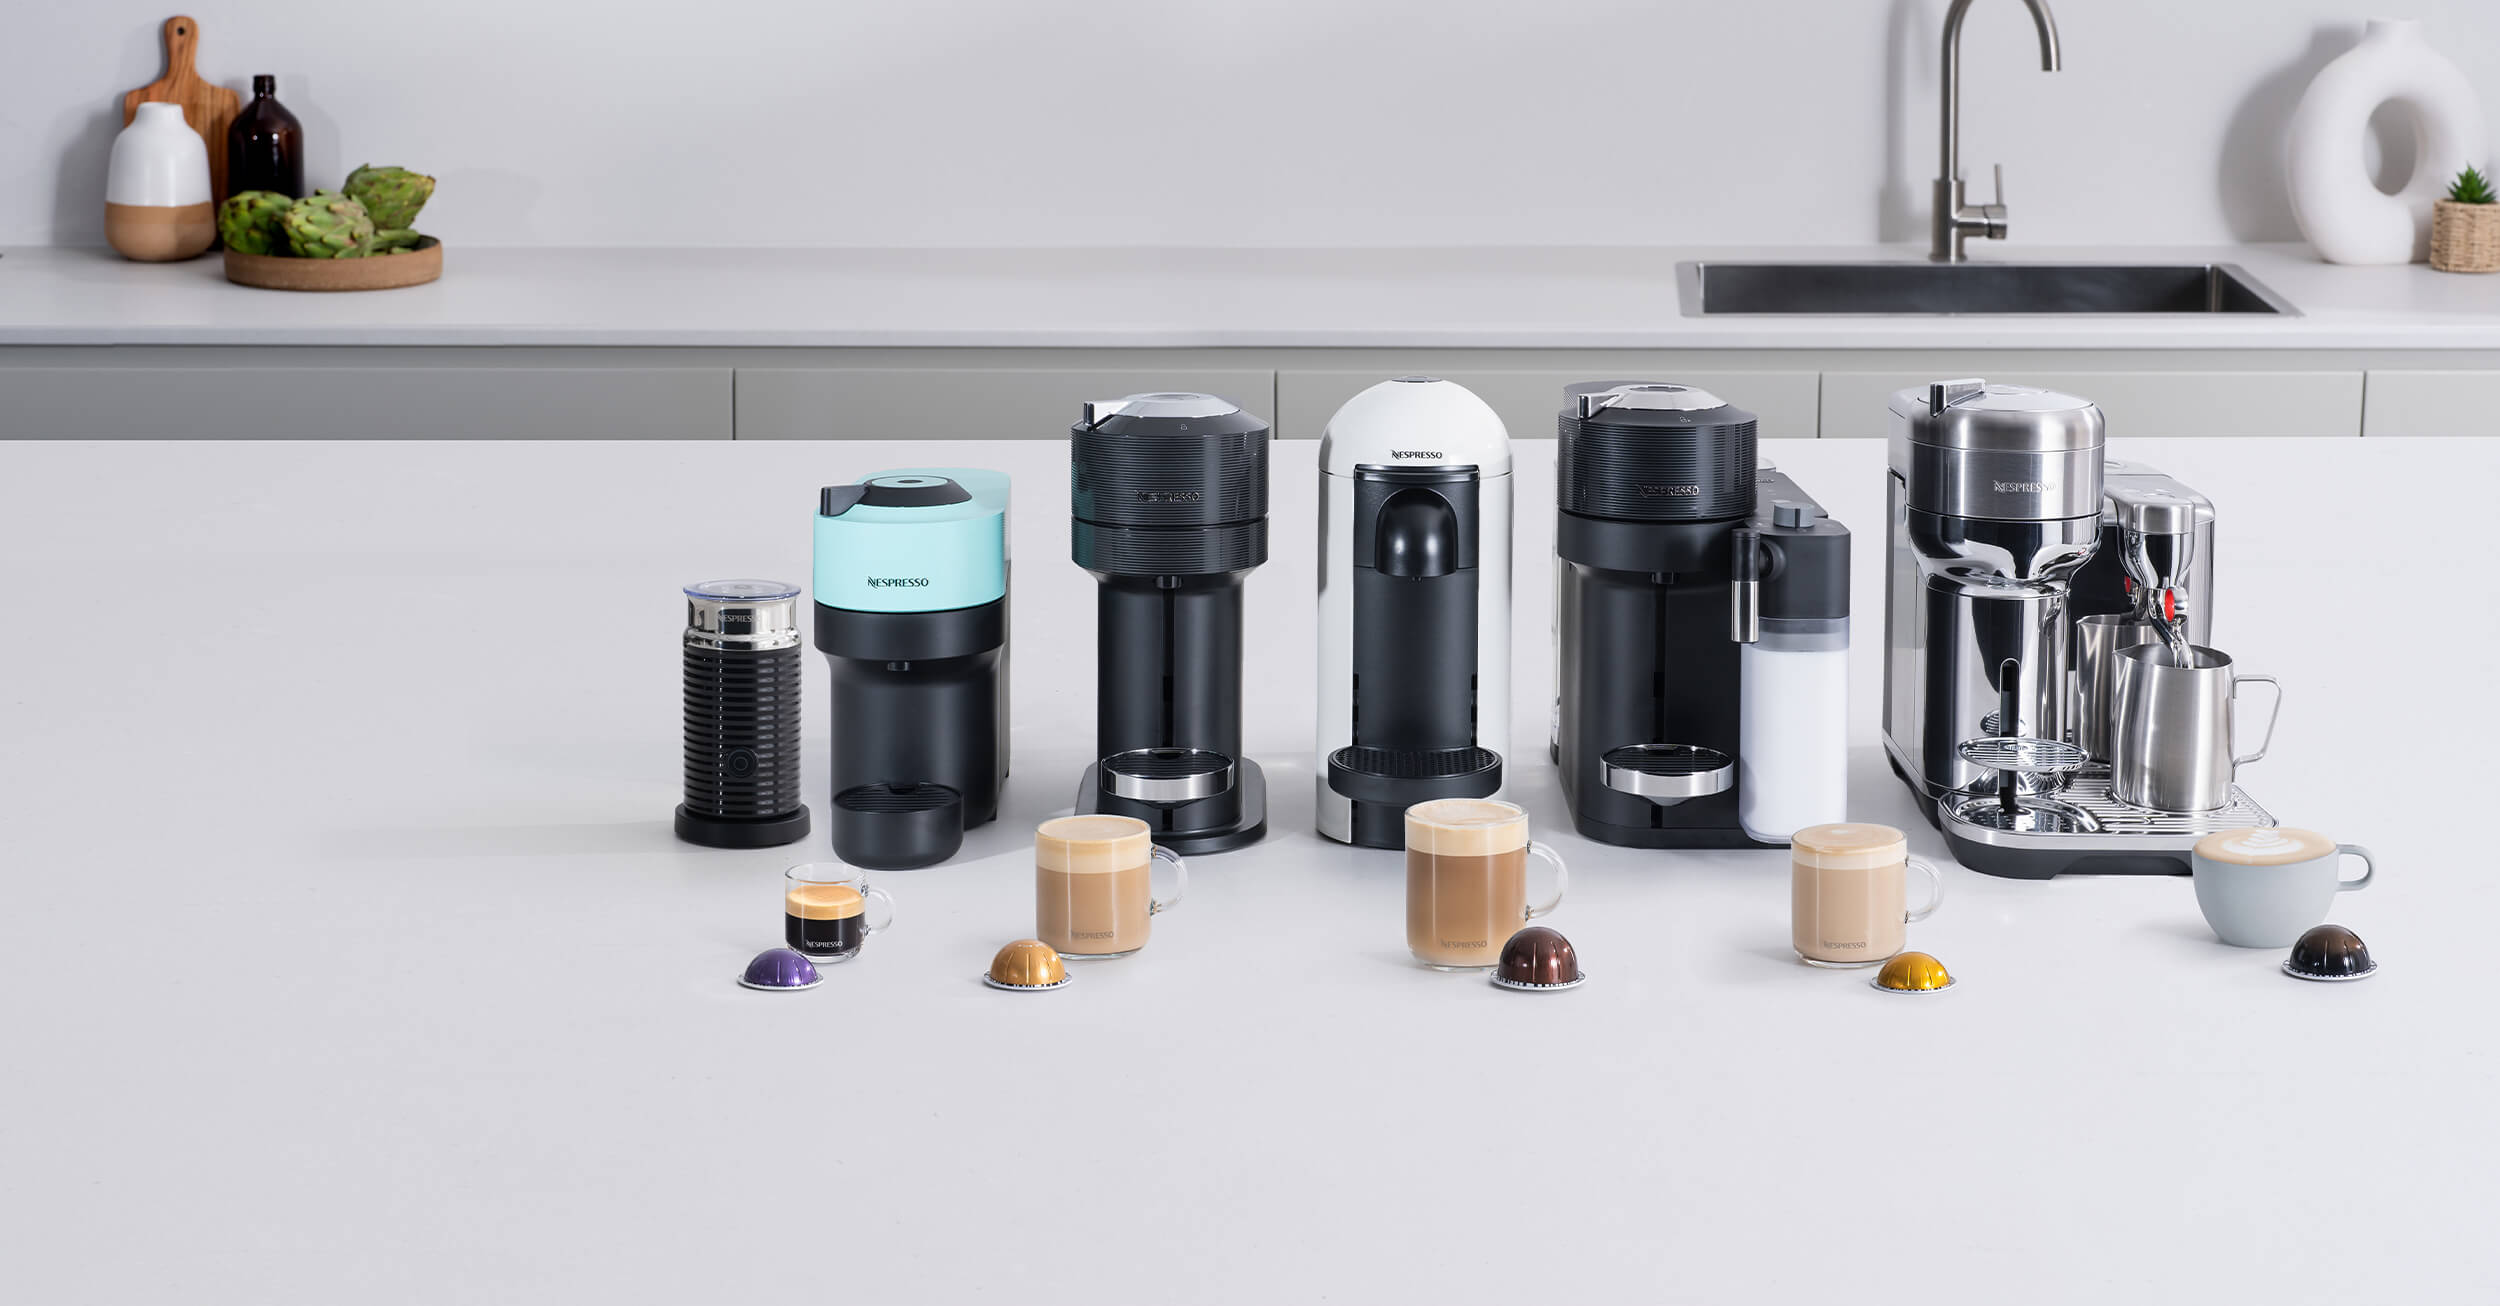 How to Choose the Best Nespresso Coffee Machine for Your Home